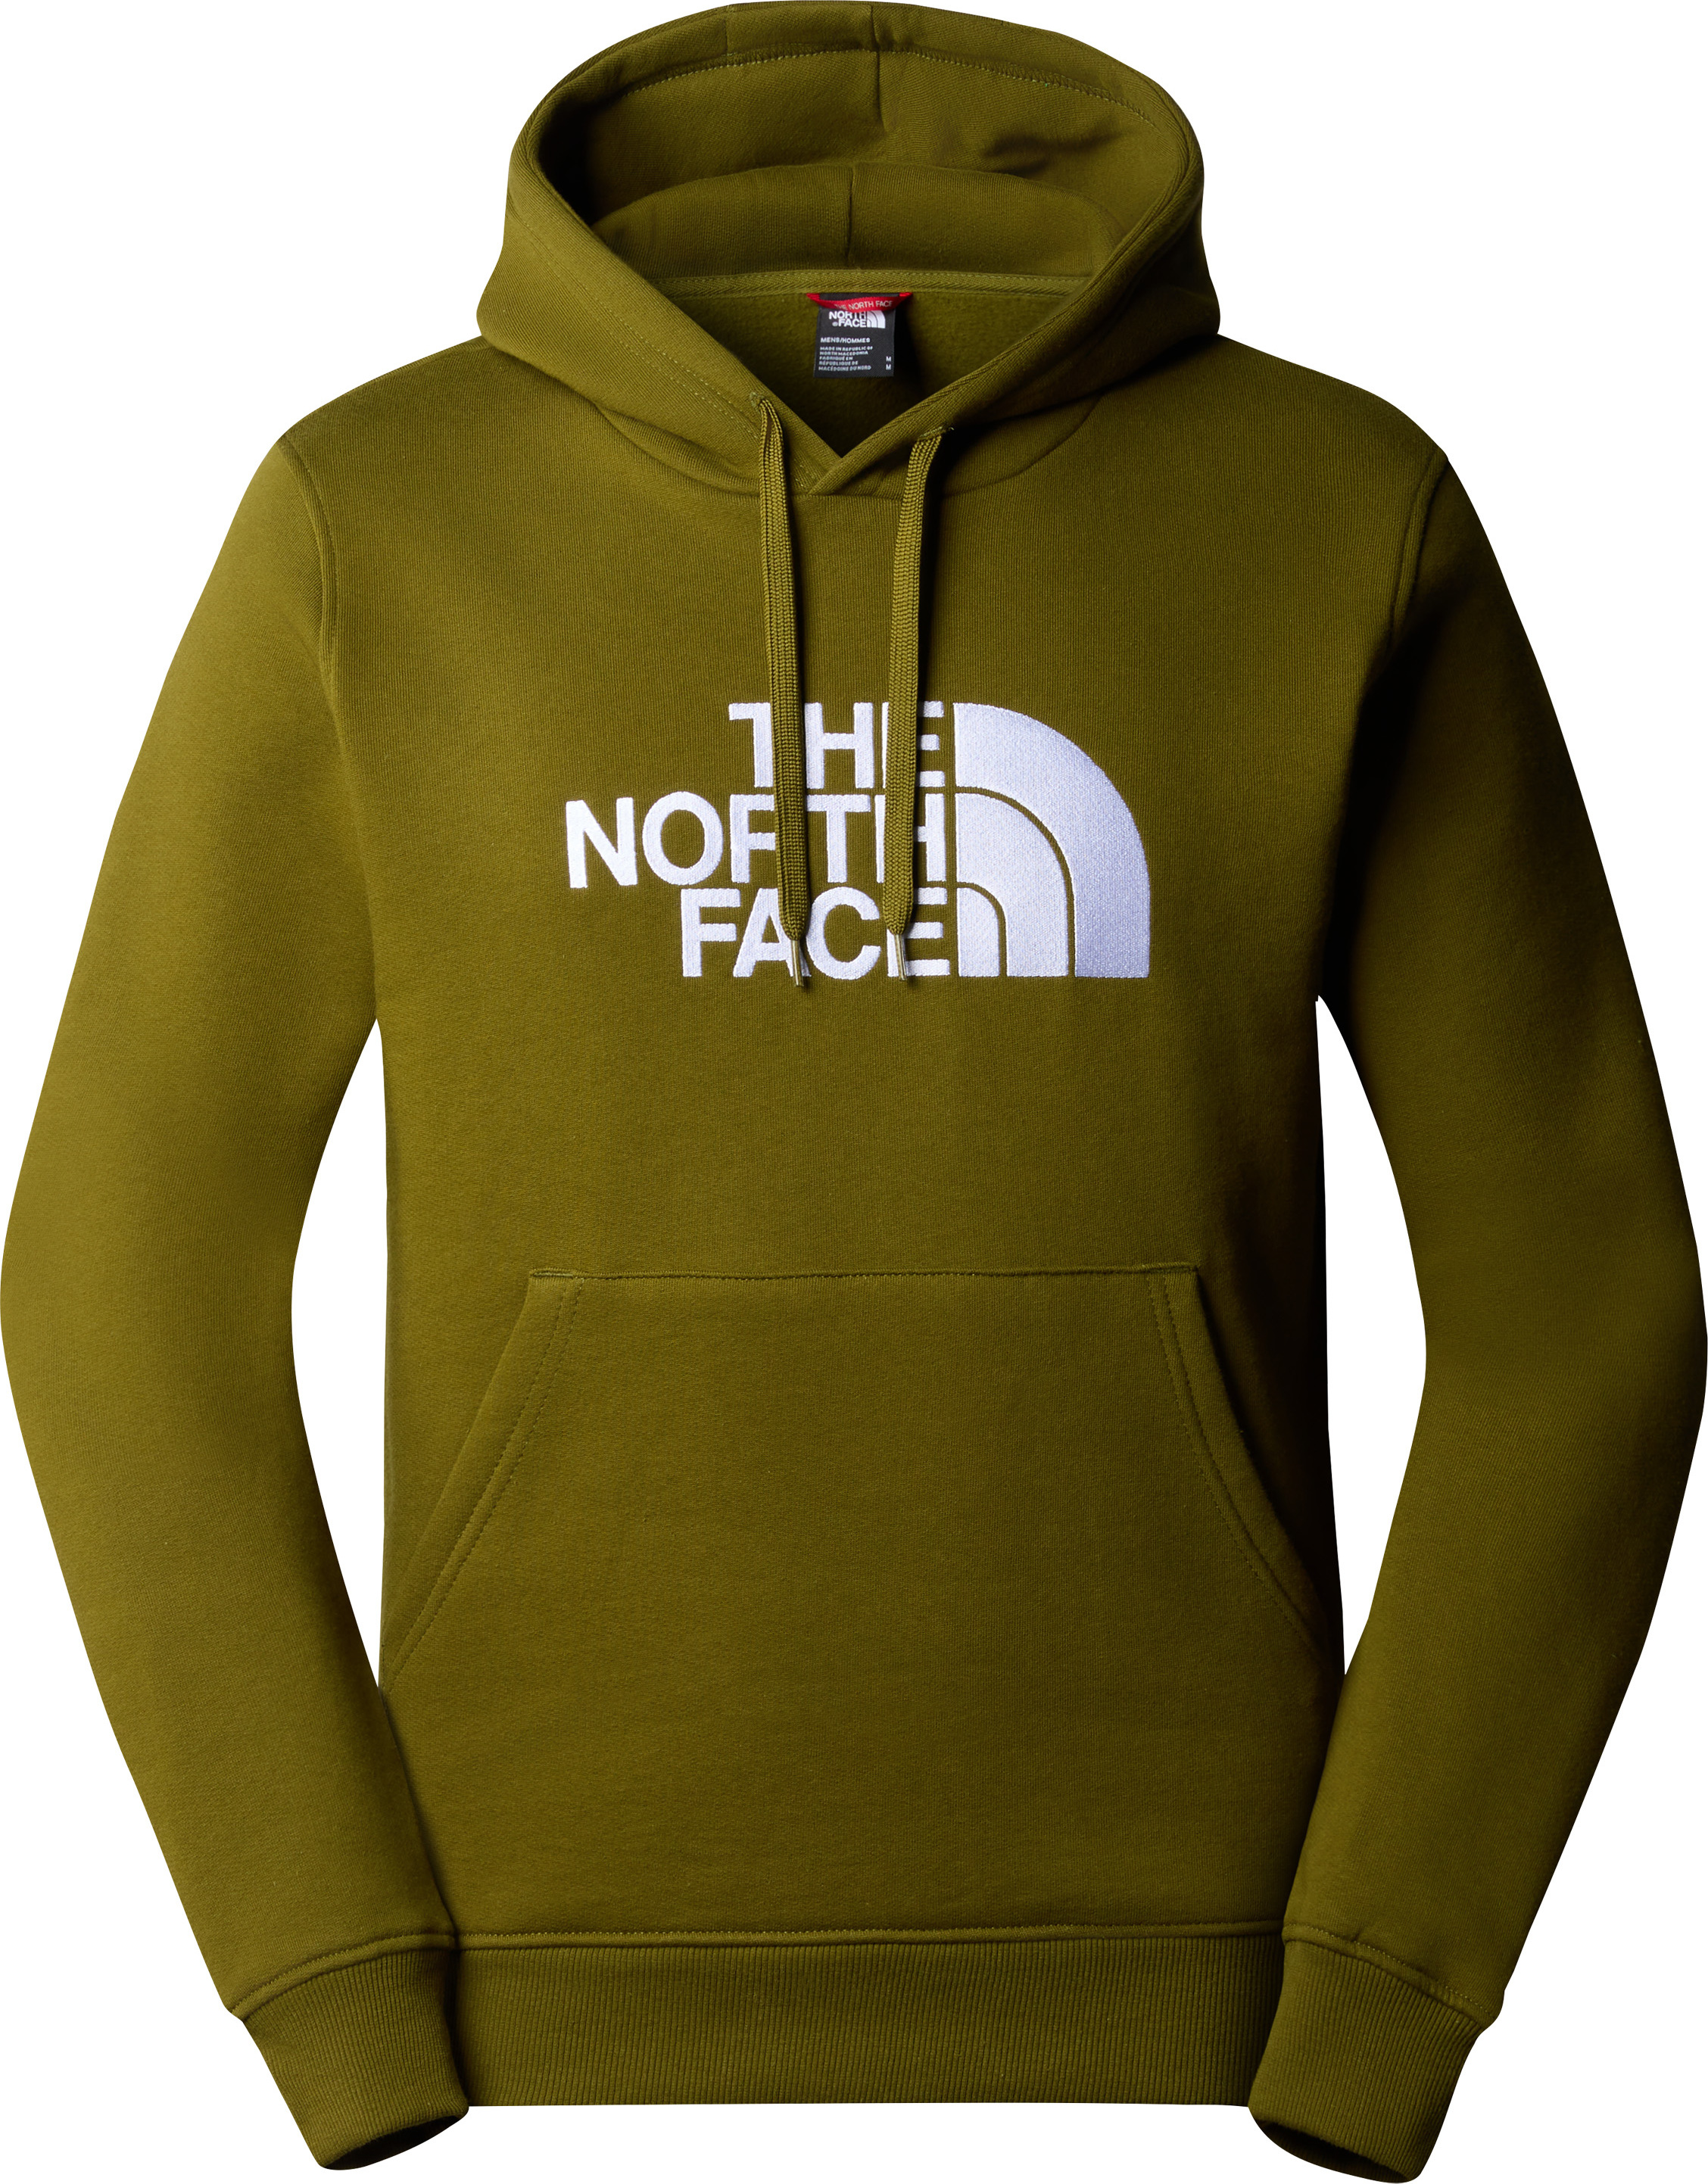 The North Face Men’s Drew Peak Pullover Hoodie Forest Olive